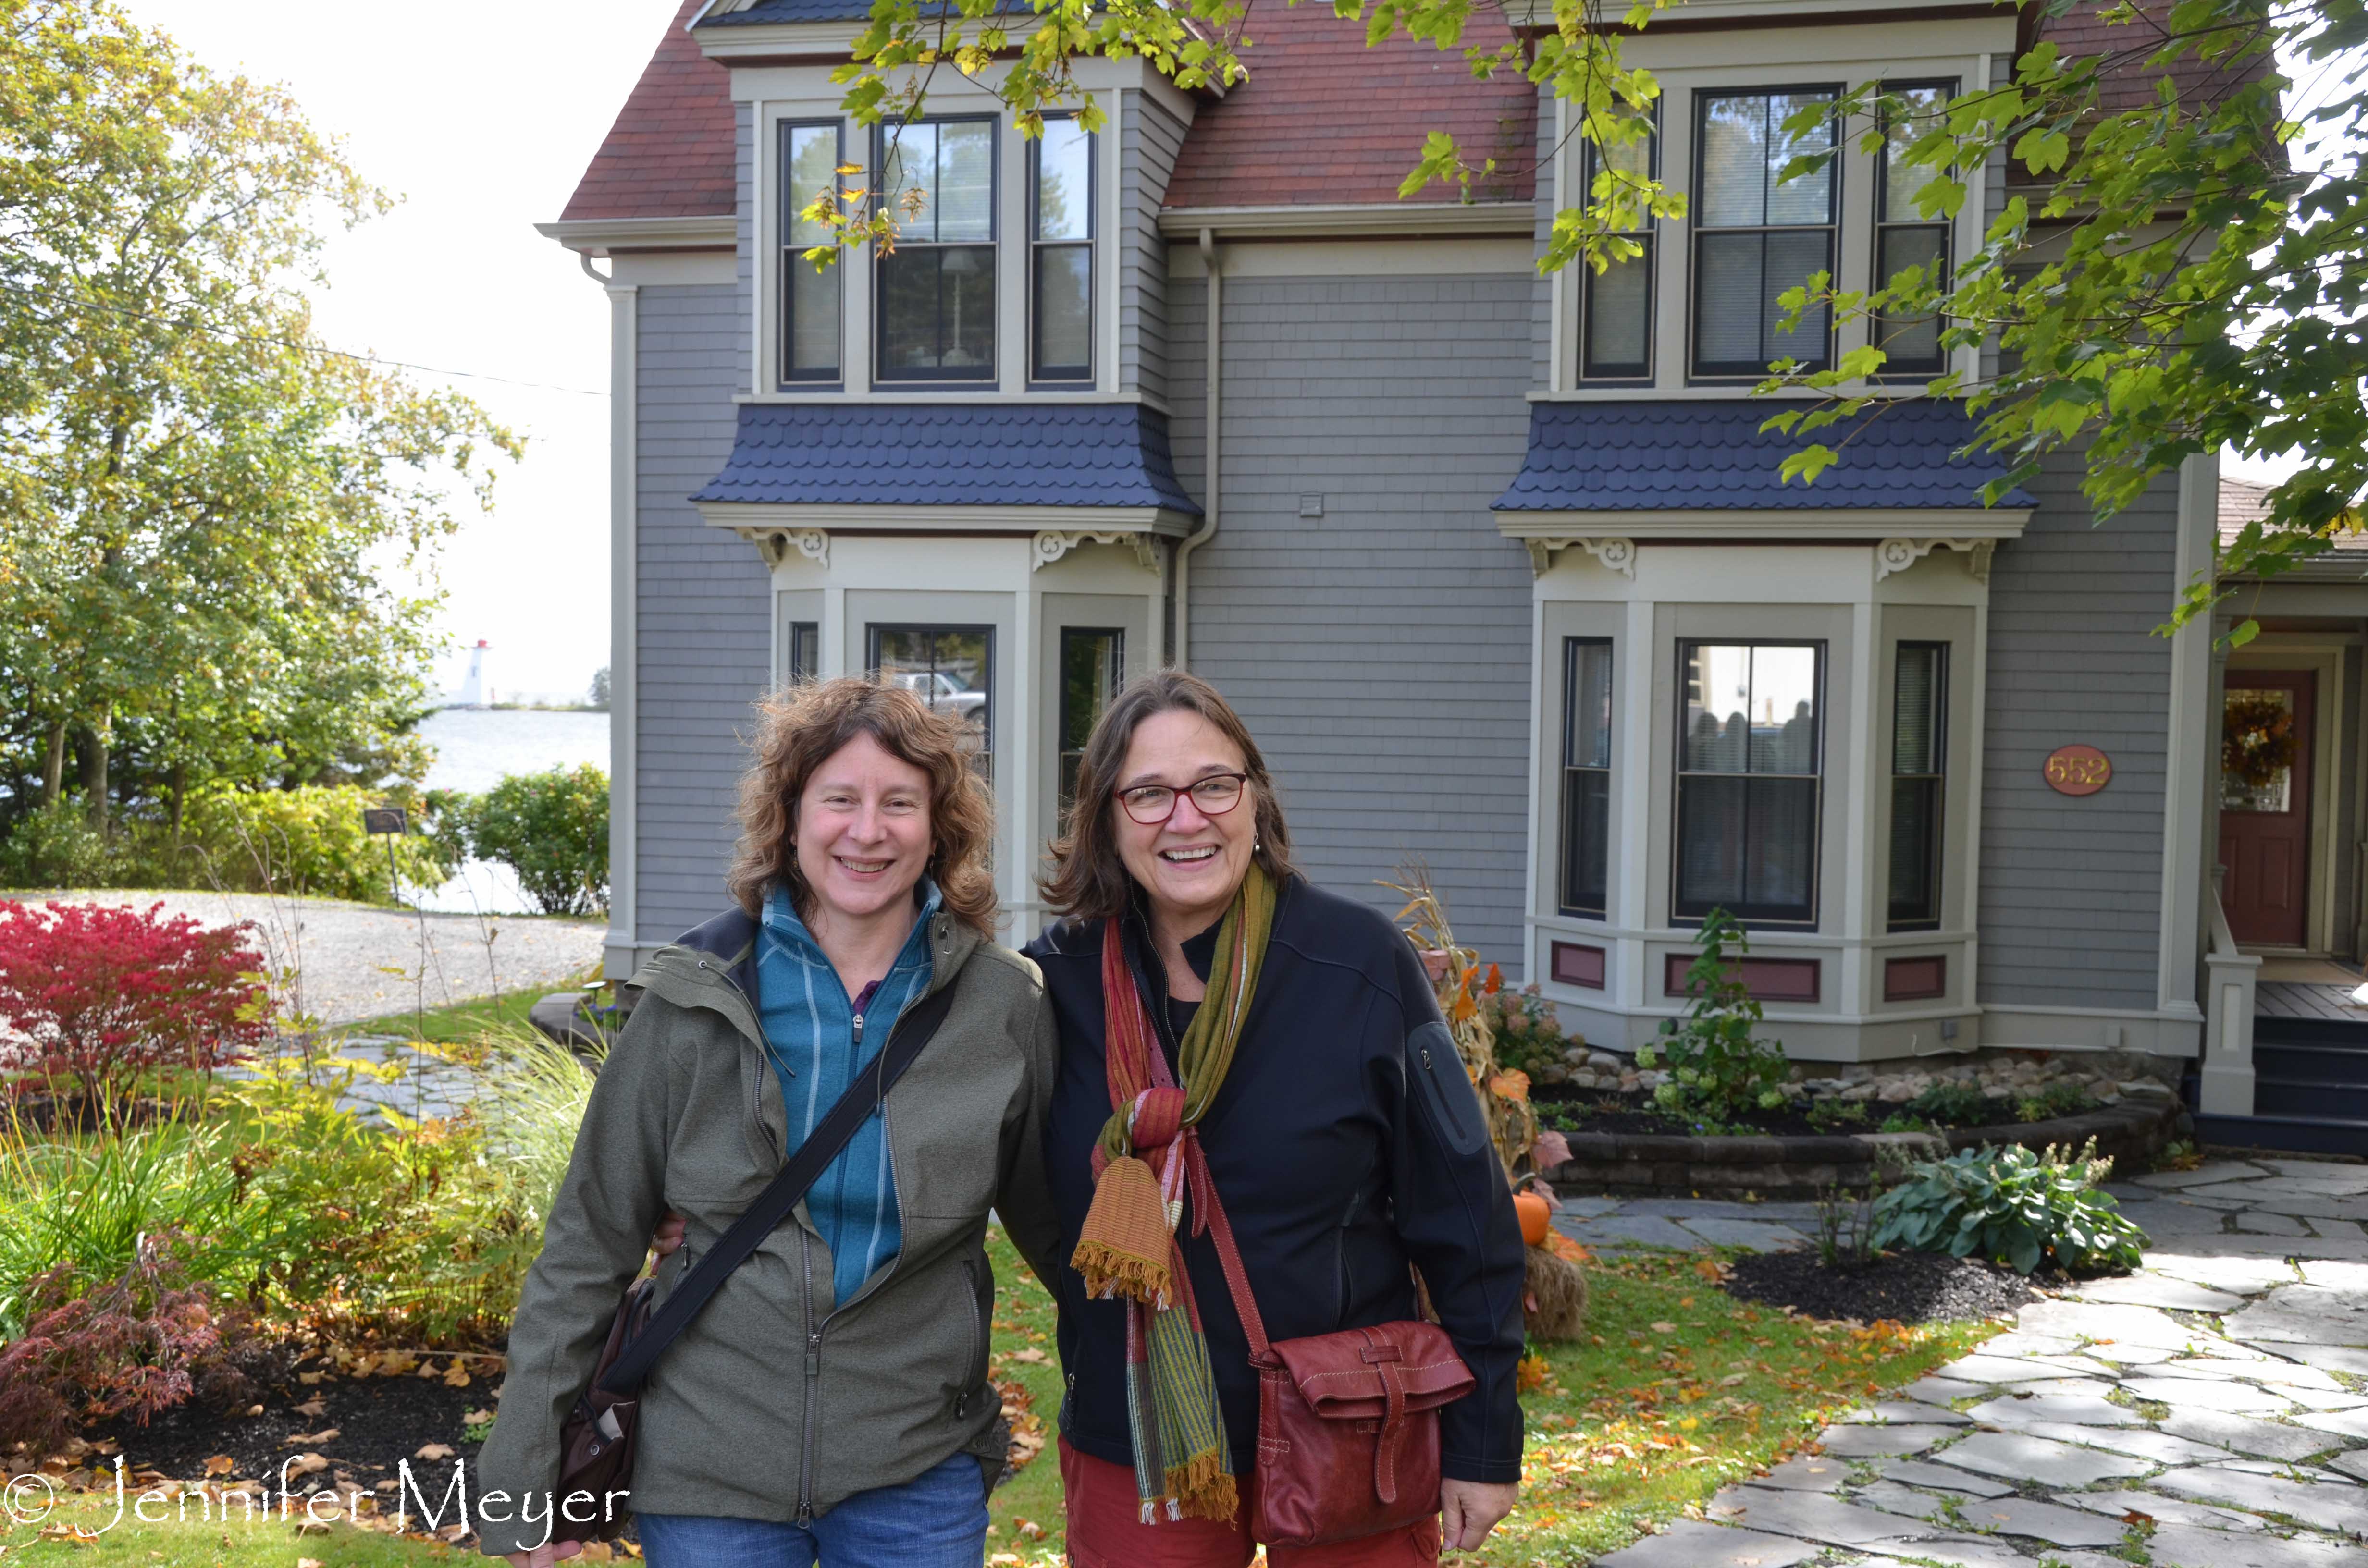 The next morning, we met Marcia and Cindy at their B&B in Baddeck.